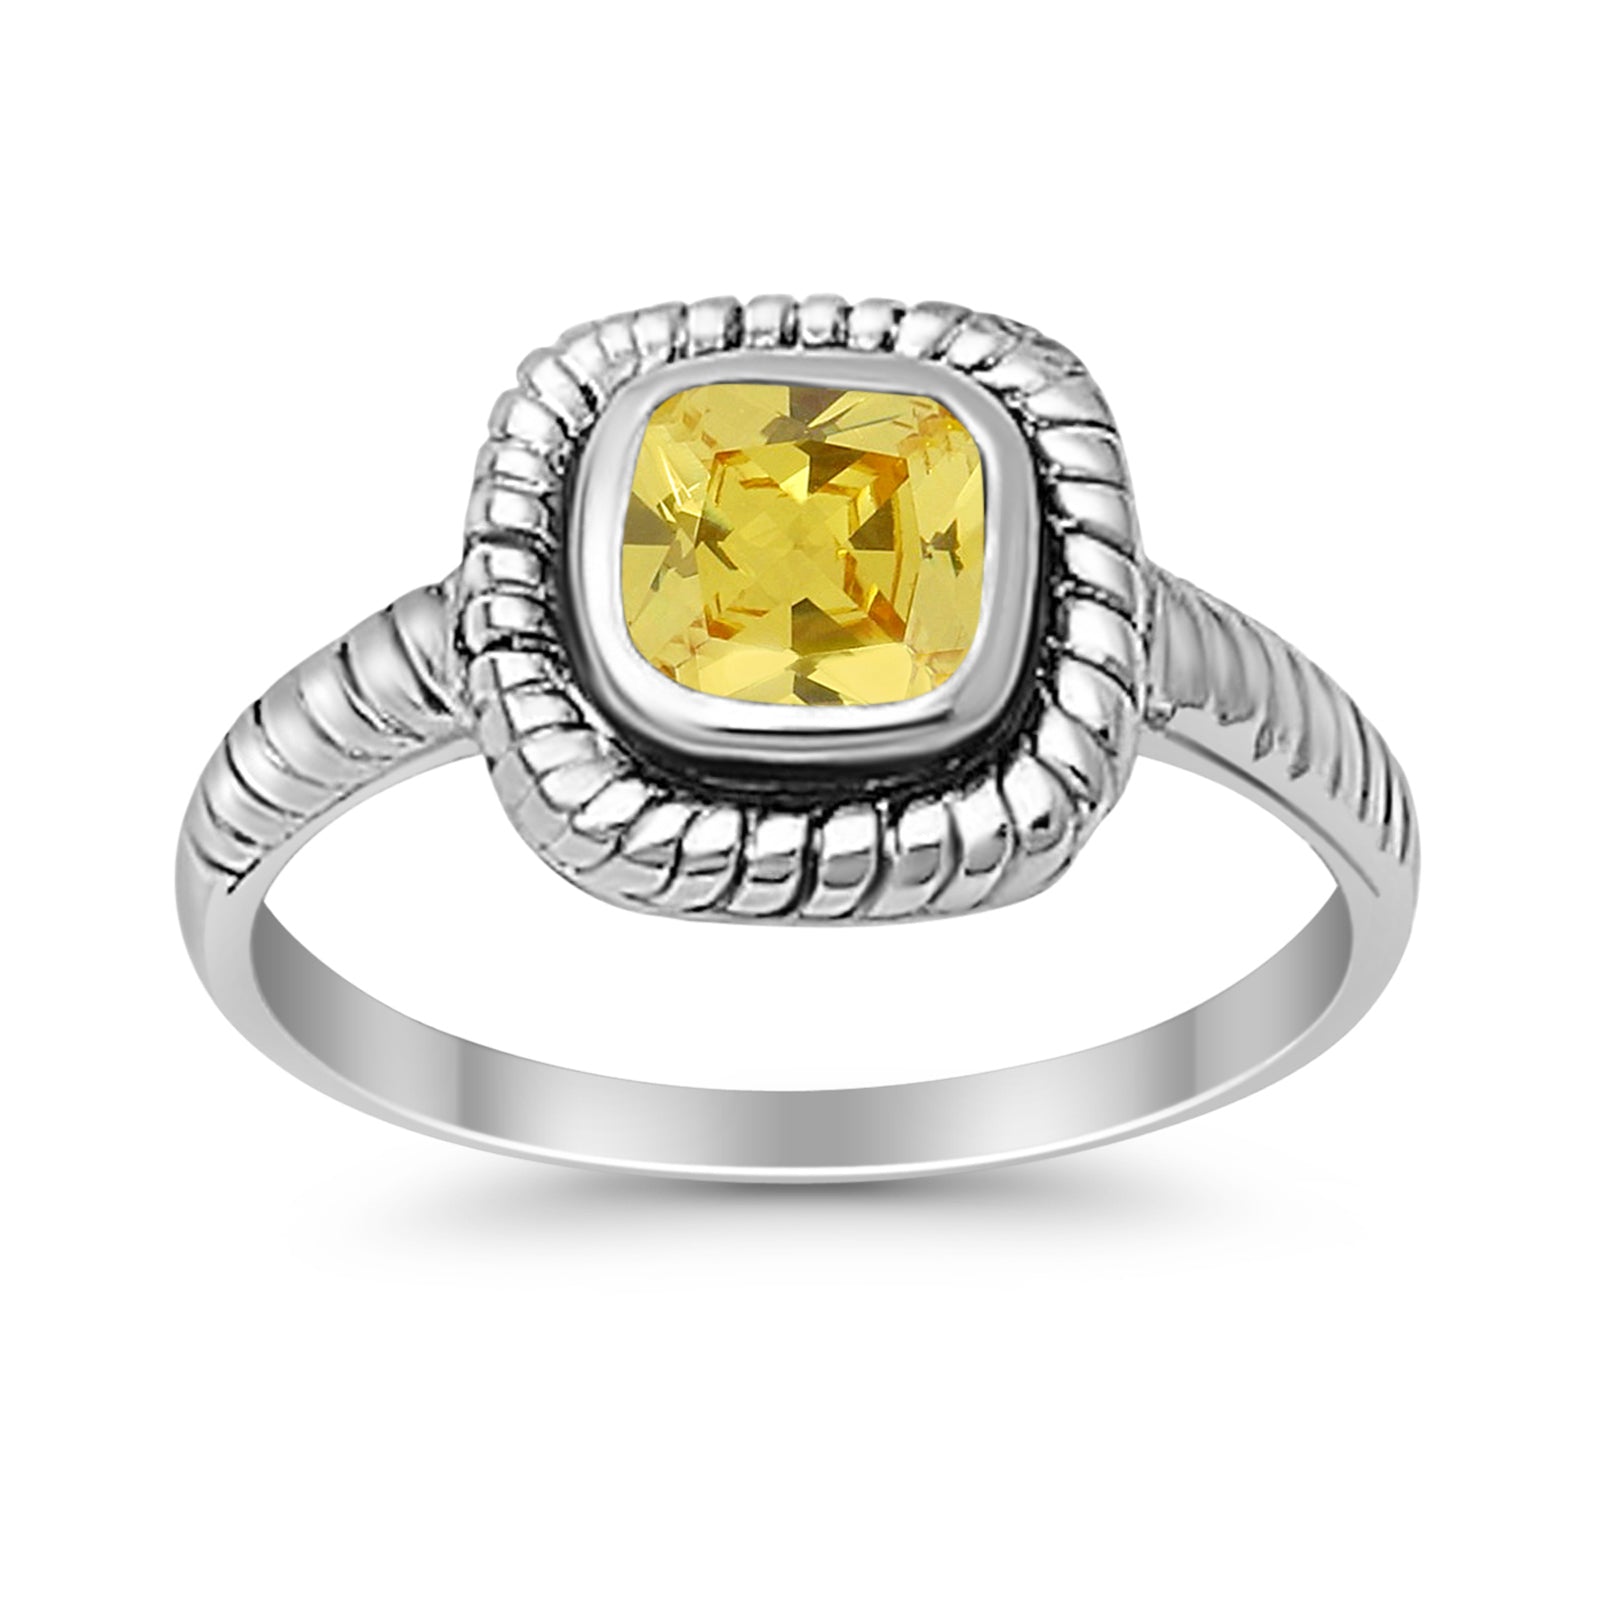 Princess Cut Simulated Yellow Cubic Zirconia Oxidized Design Ring 925 Sterling Silver